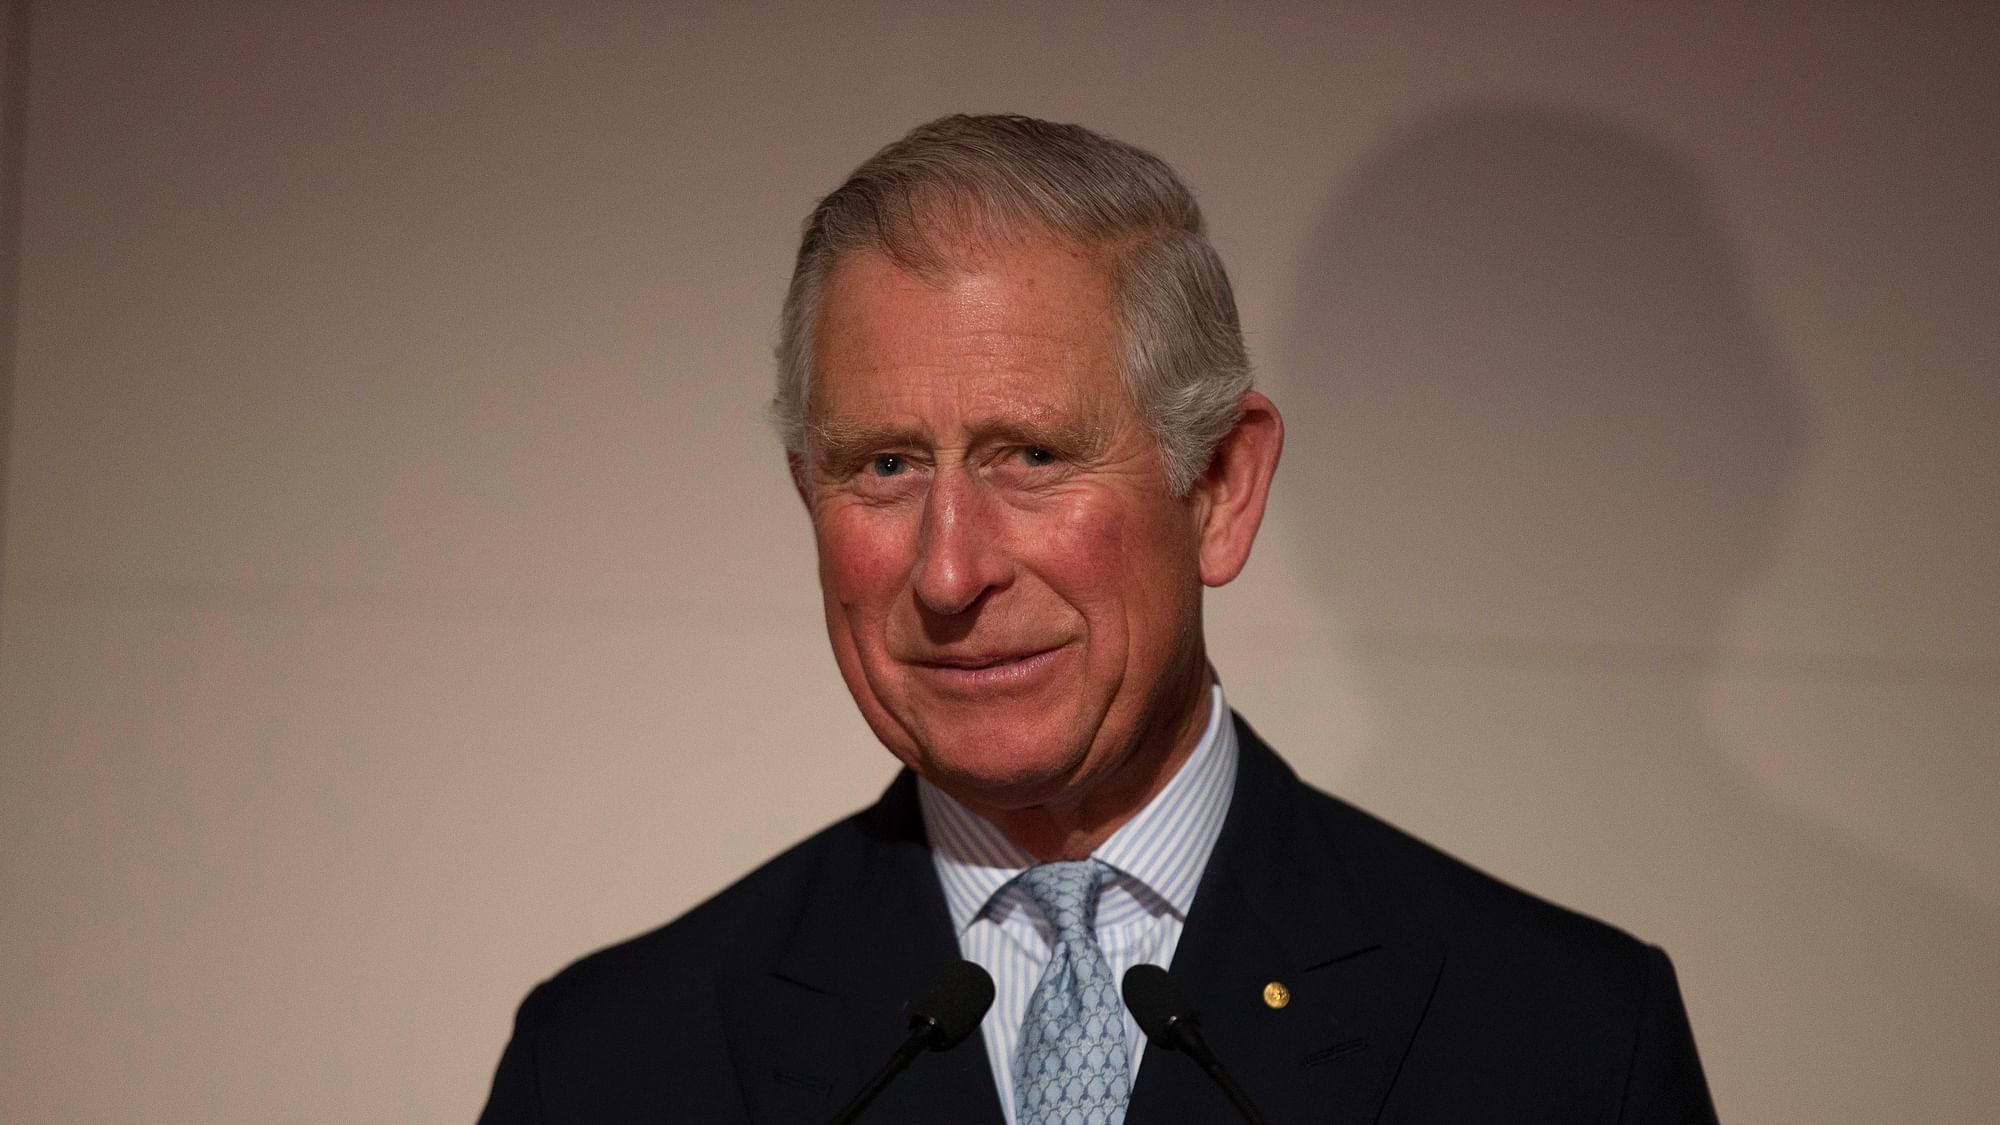  Prince Charles of Wales is visiting India on Wednesday 13 November